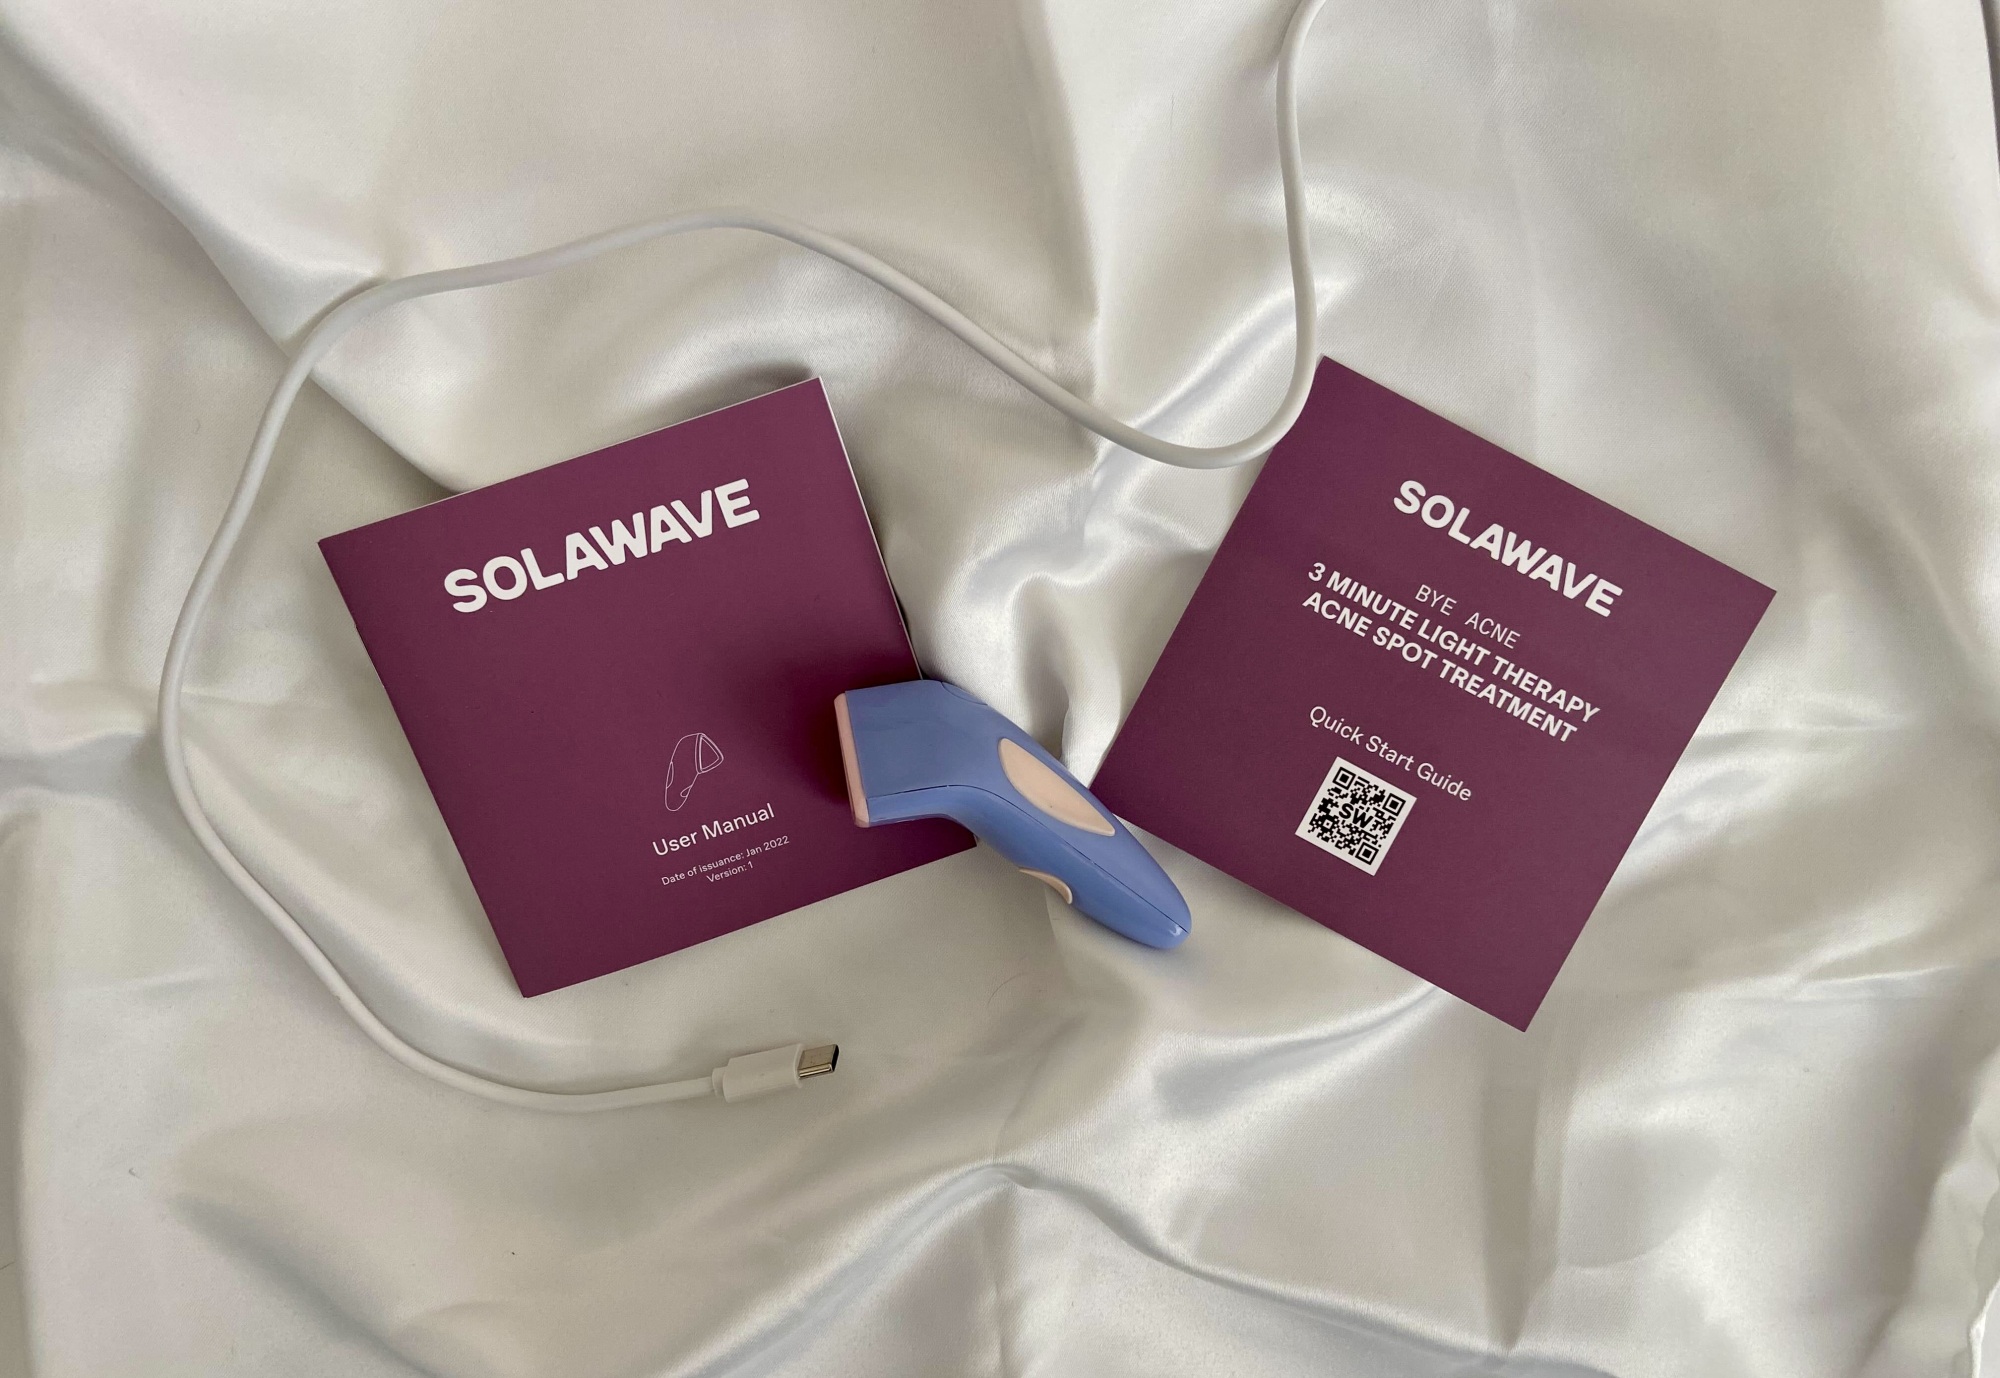 solawave bye acne device with start guides and charging cord